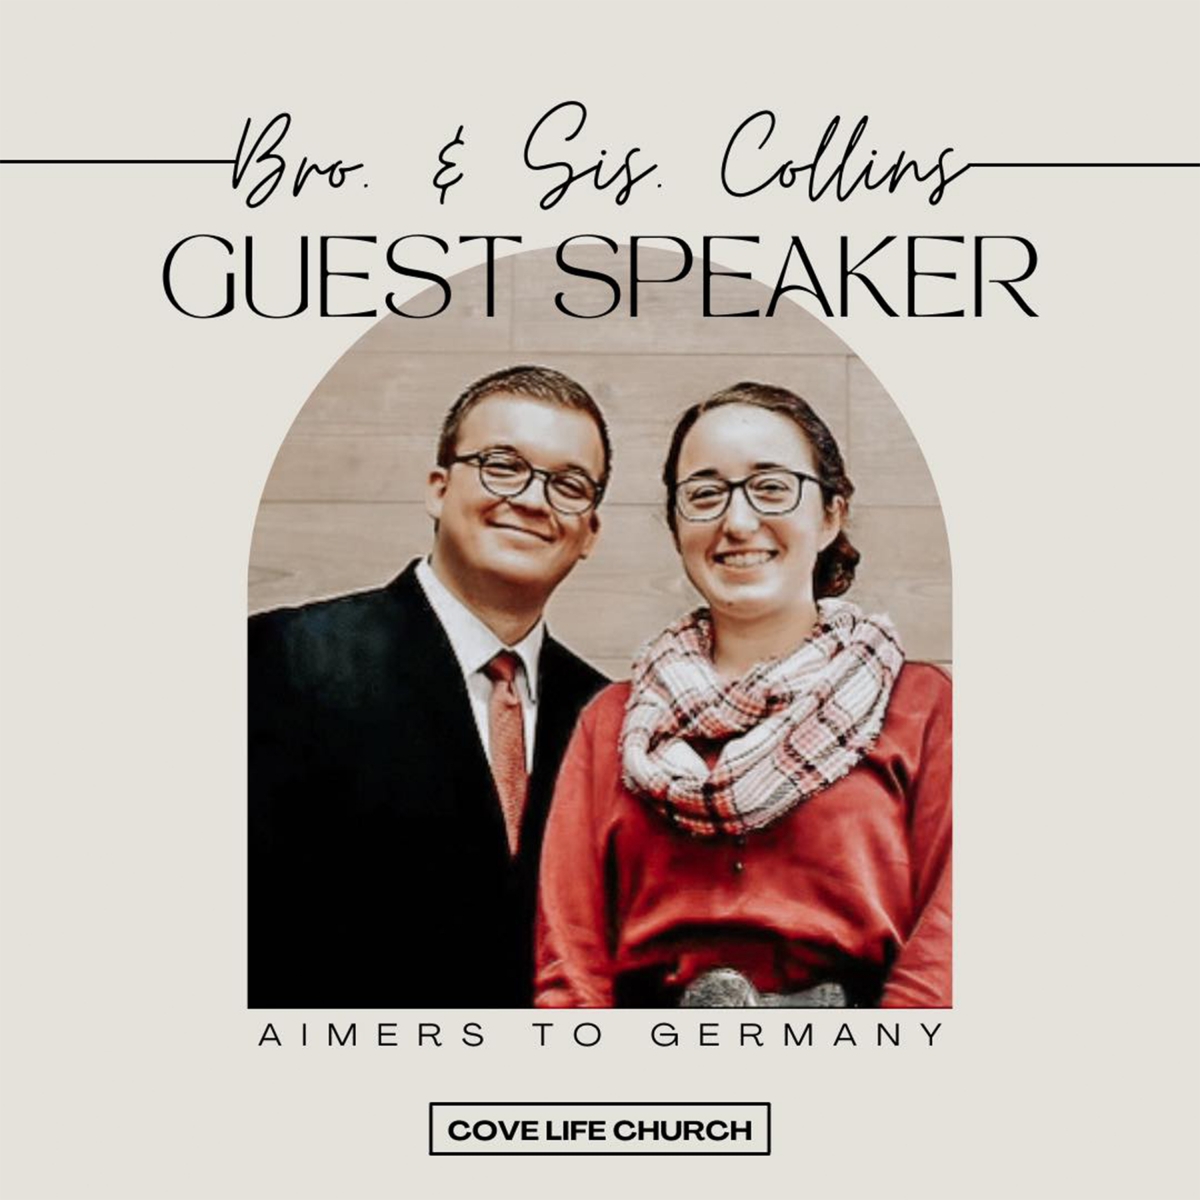 [Bro. & Sis. Collins from Germany]